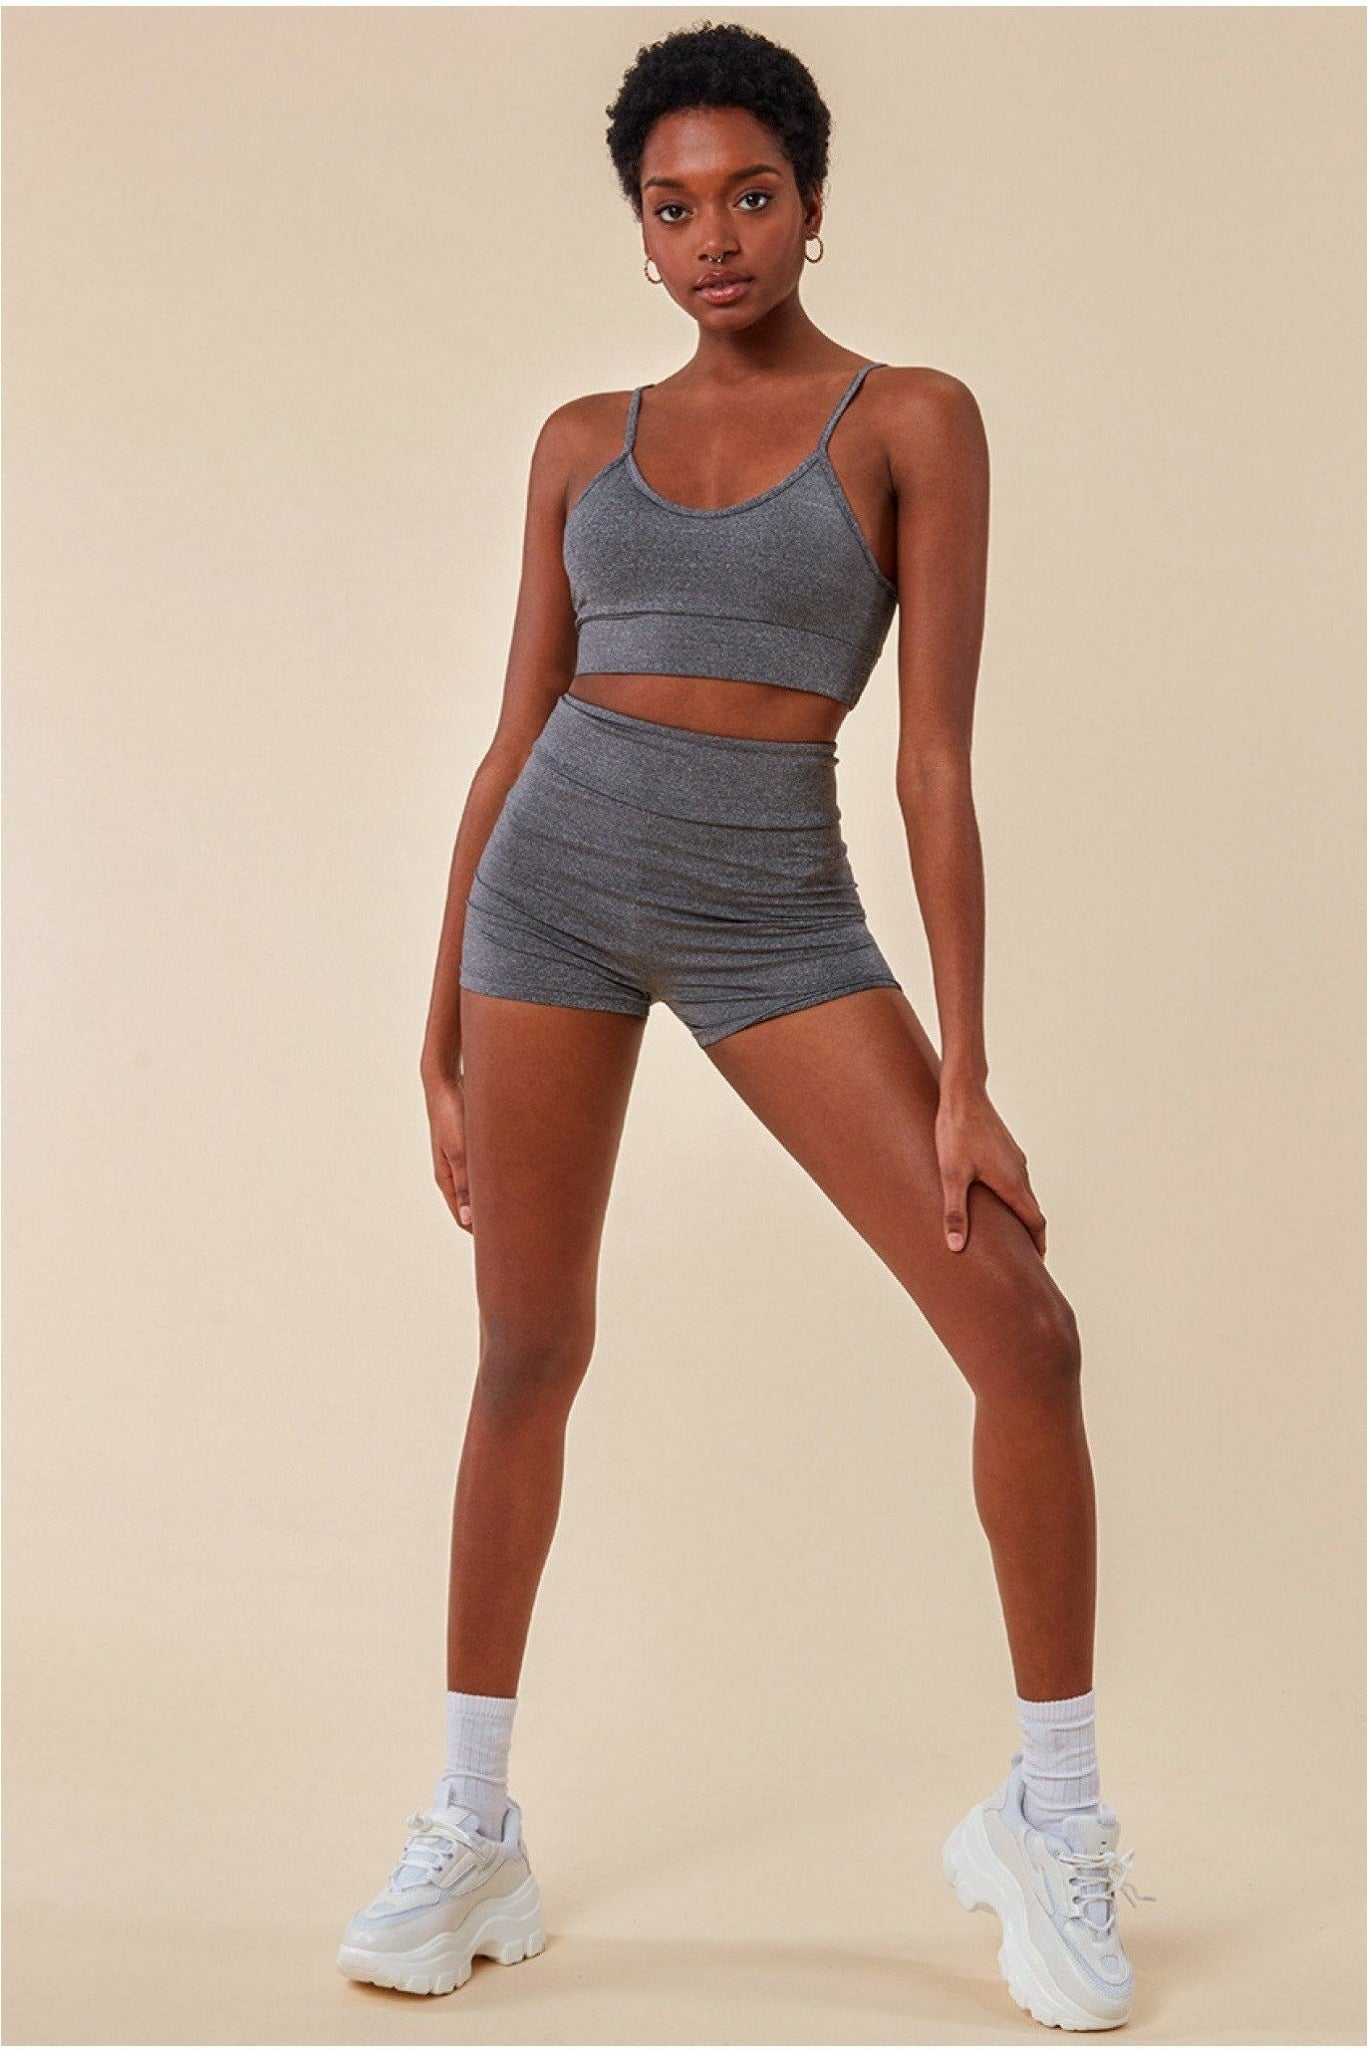 Cosmochic Cropped Bralette & Cycle Short Set - Grey